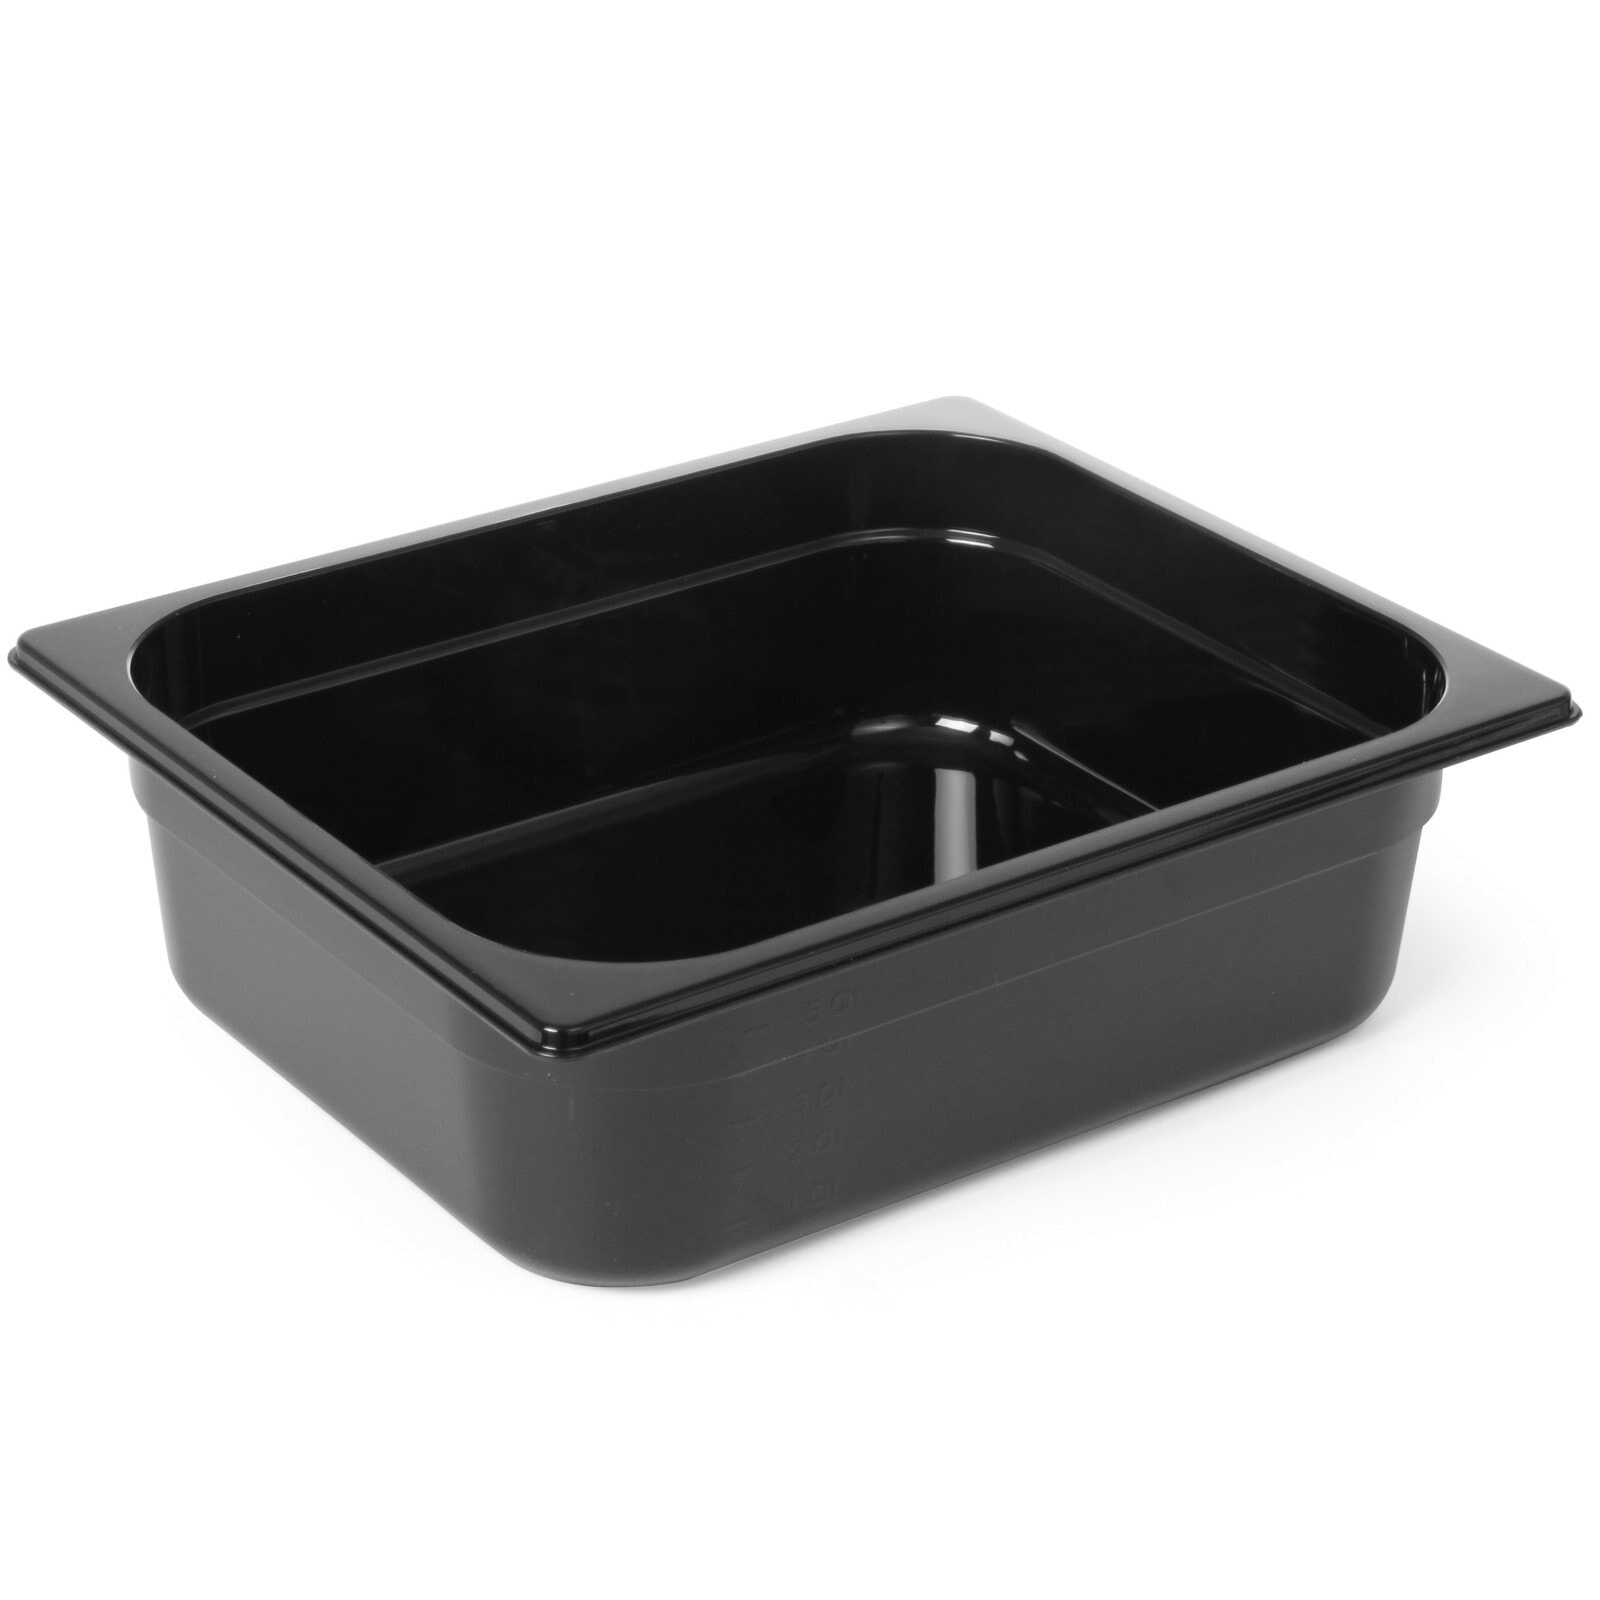 Gastronomy container GN 1/2 black polycarbonate 325x265x200mm 12.5L Hendi 862407